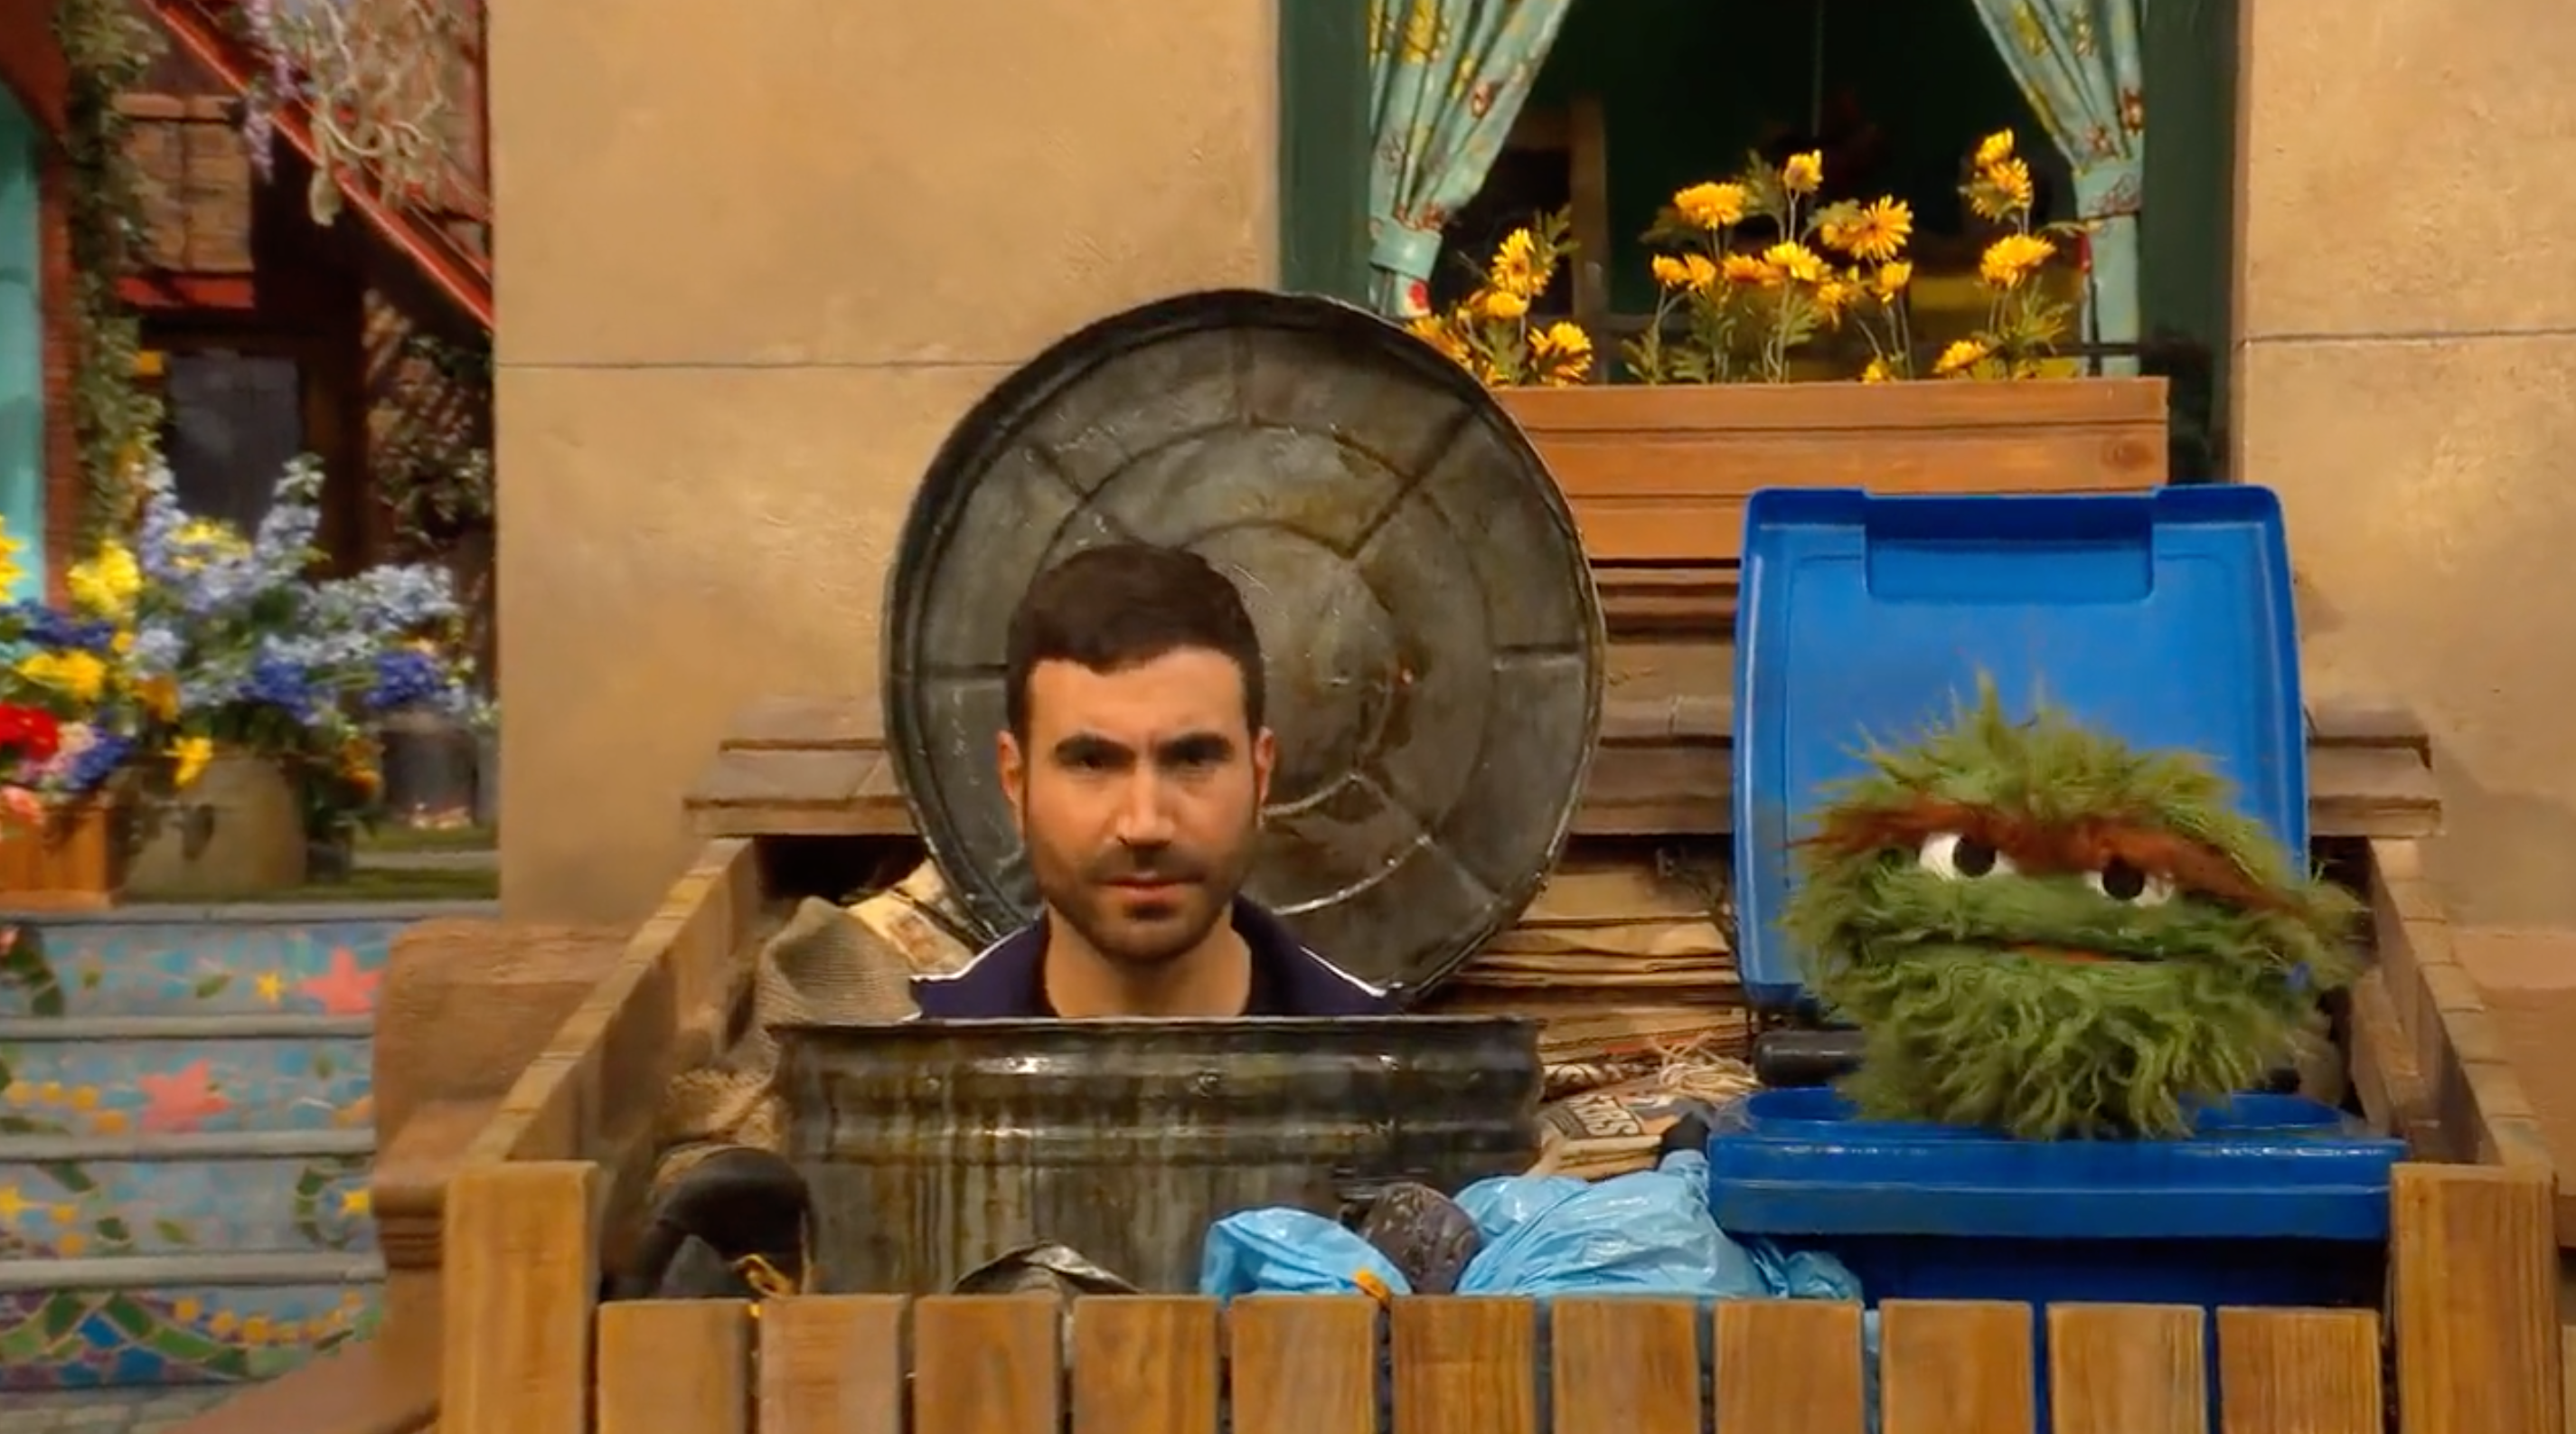 Ted Lasso‘s Brett Goldstein gets to hang out with kindred spirit Oscar The Grouch on Sesame Street